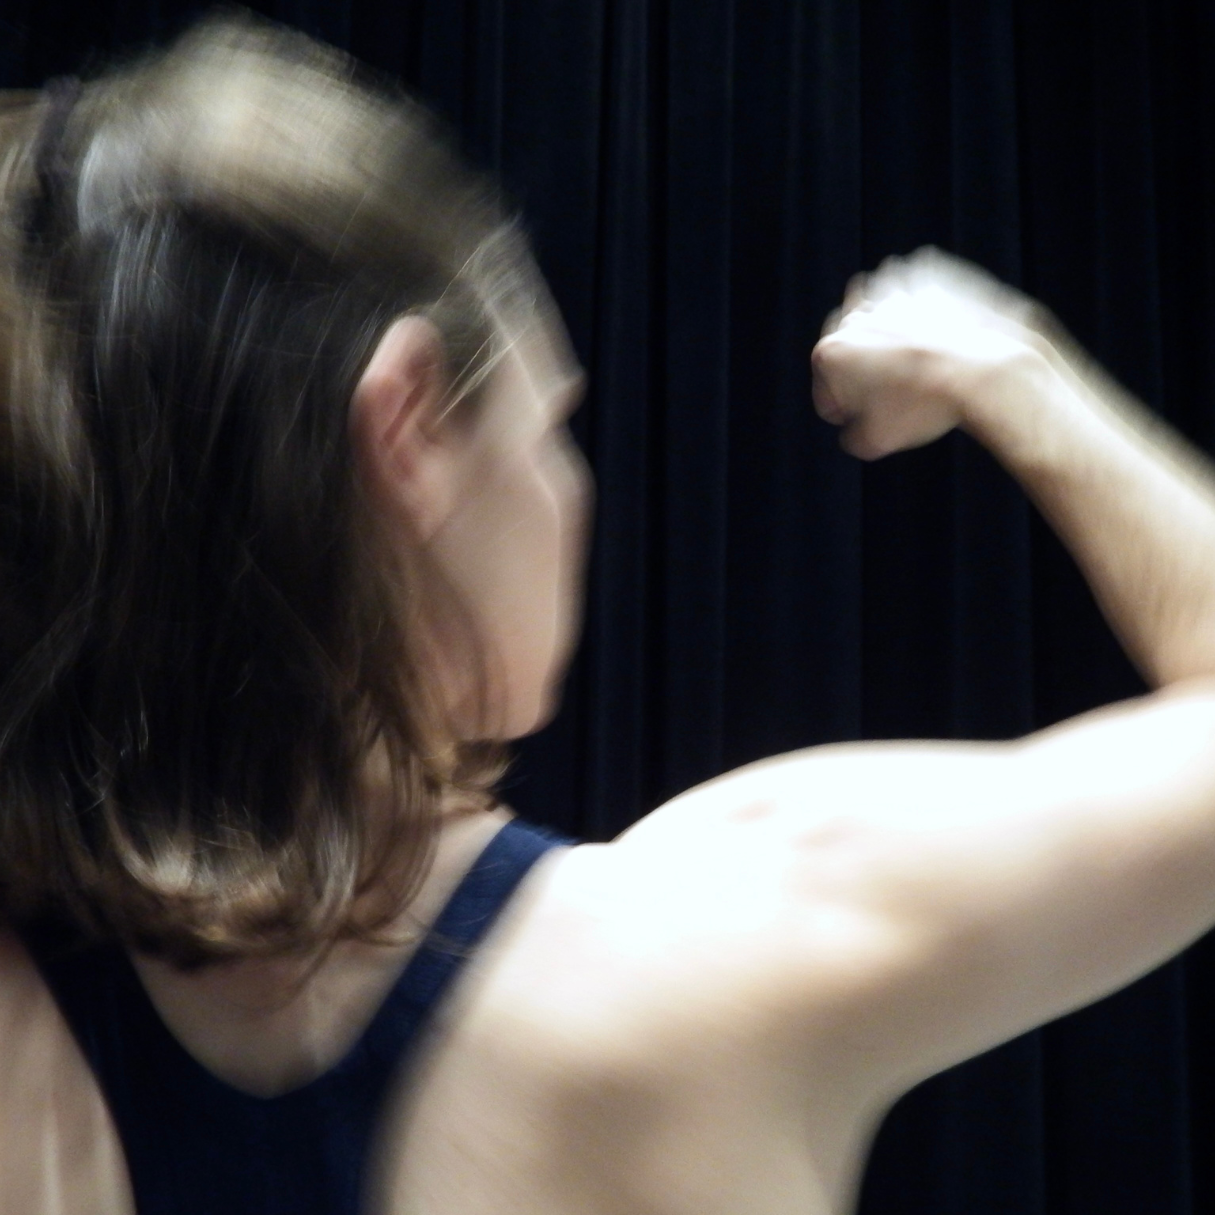 A dancer with short brown hair is captured in motion from the shoulders up in front of a black background. She is facing away from the camera and has her right first raised to eye level at her side.